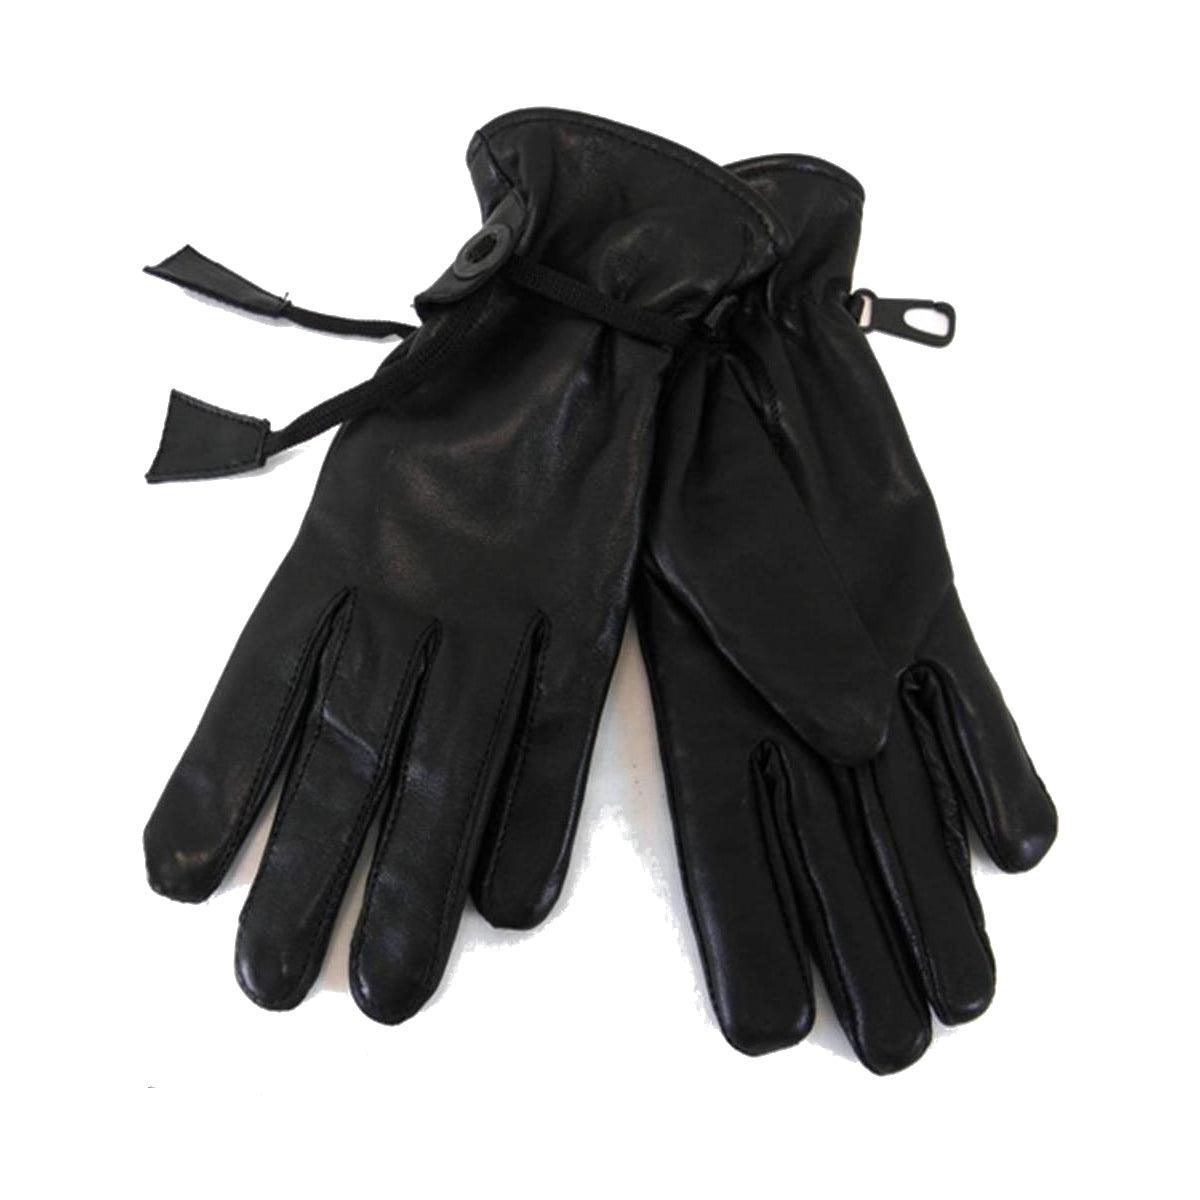 Vance Ladies Soft Leather Lined Riding Gloves